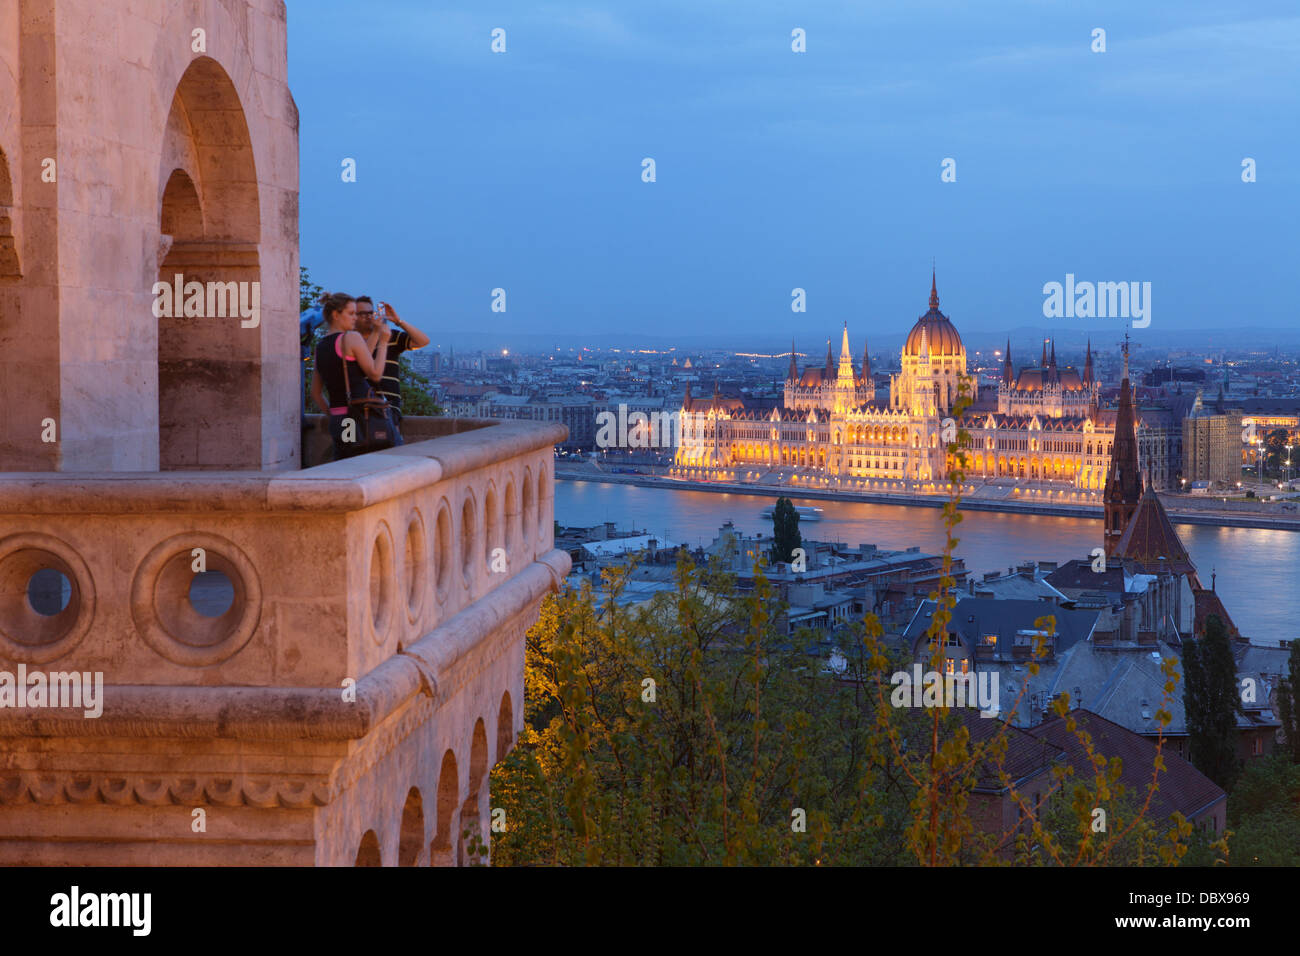 Parliament house seen from the Fishermen's Bastions, Budapest, Hungary Stock Photo